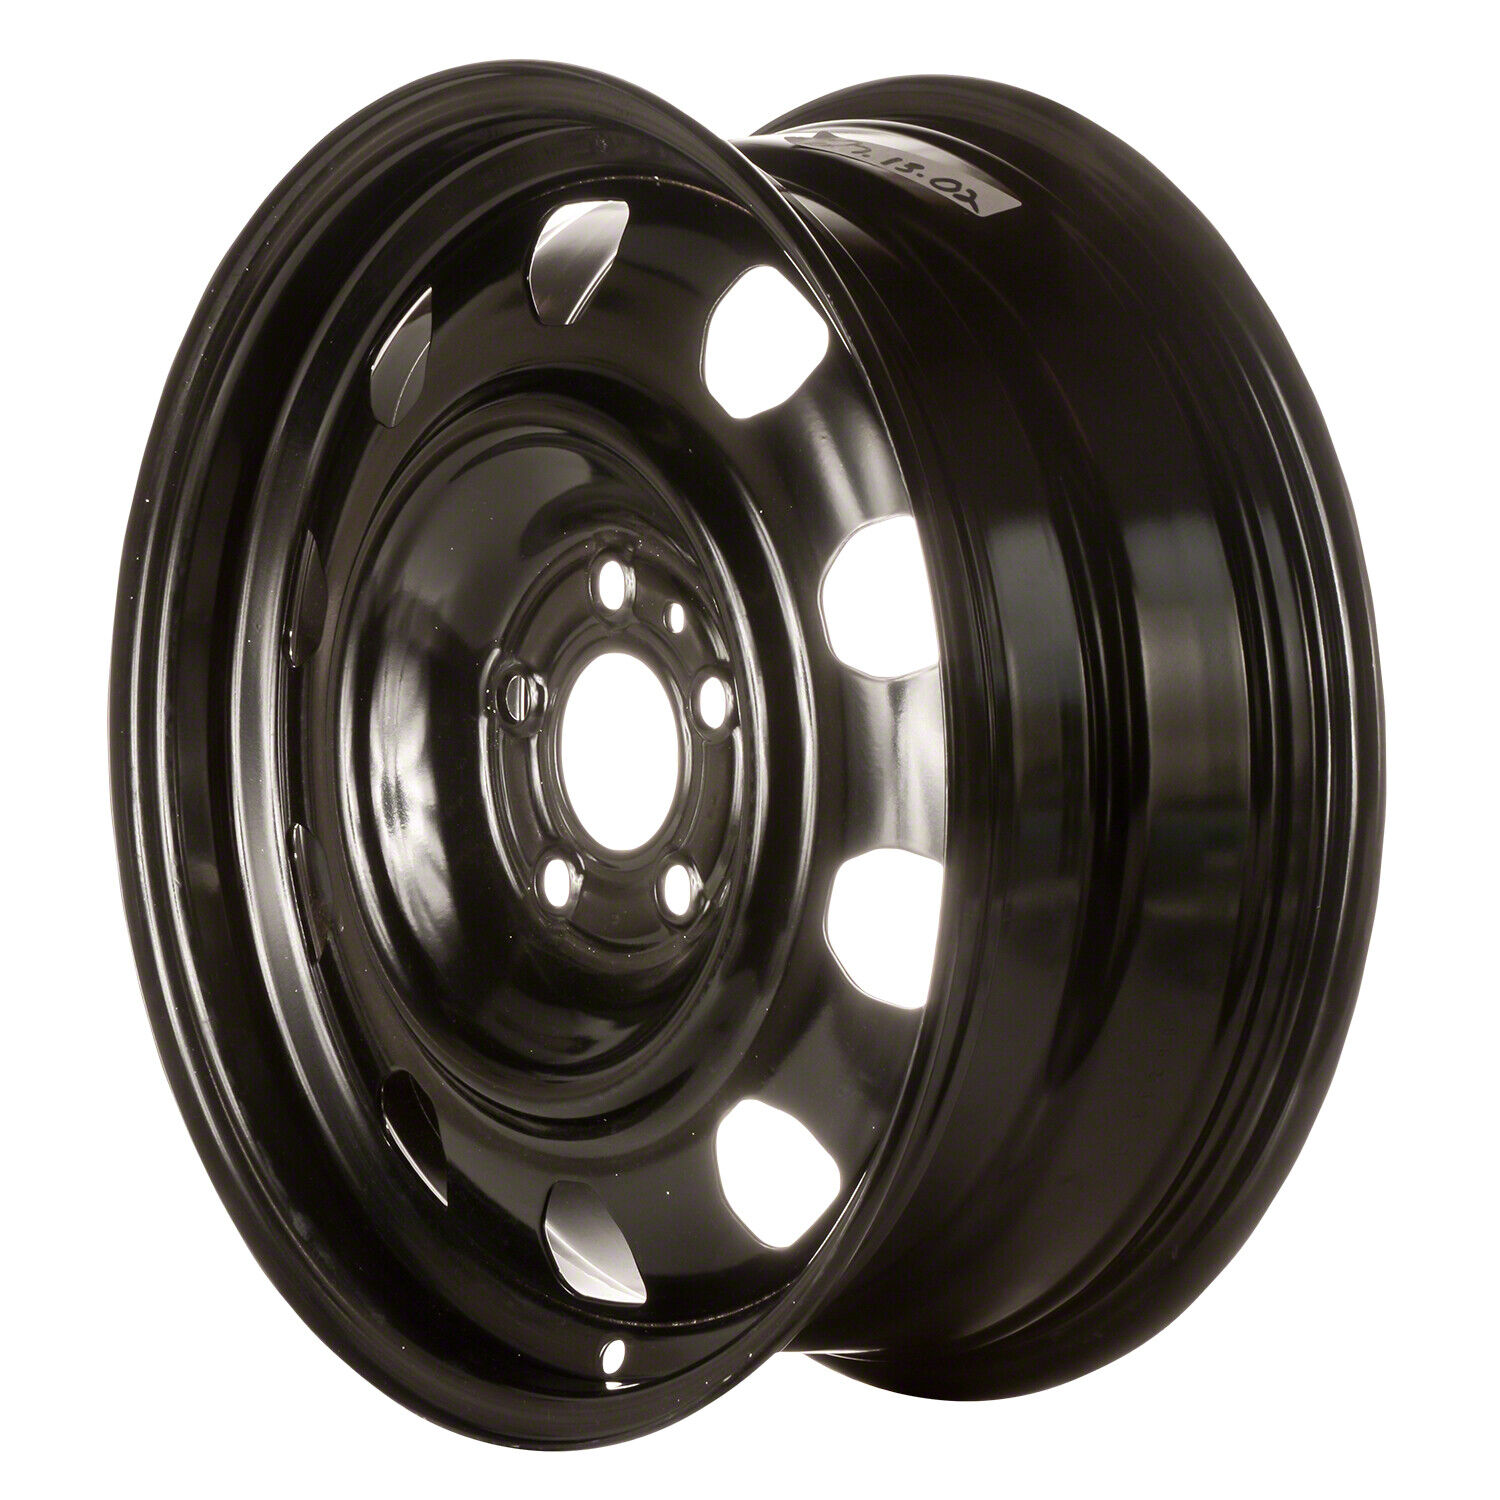 02356 Reconditioned Factory OEM Steel Wheel 17x6.5 Black Full Painted